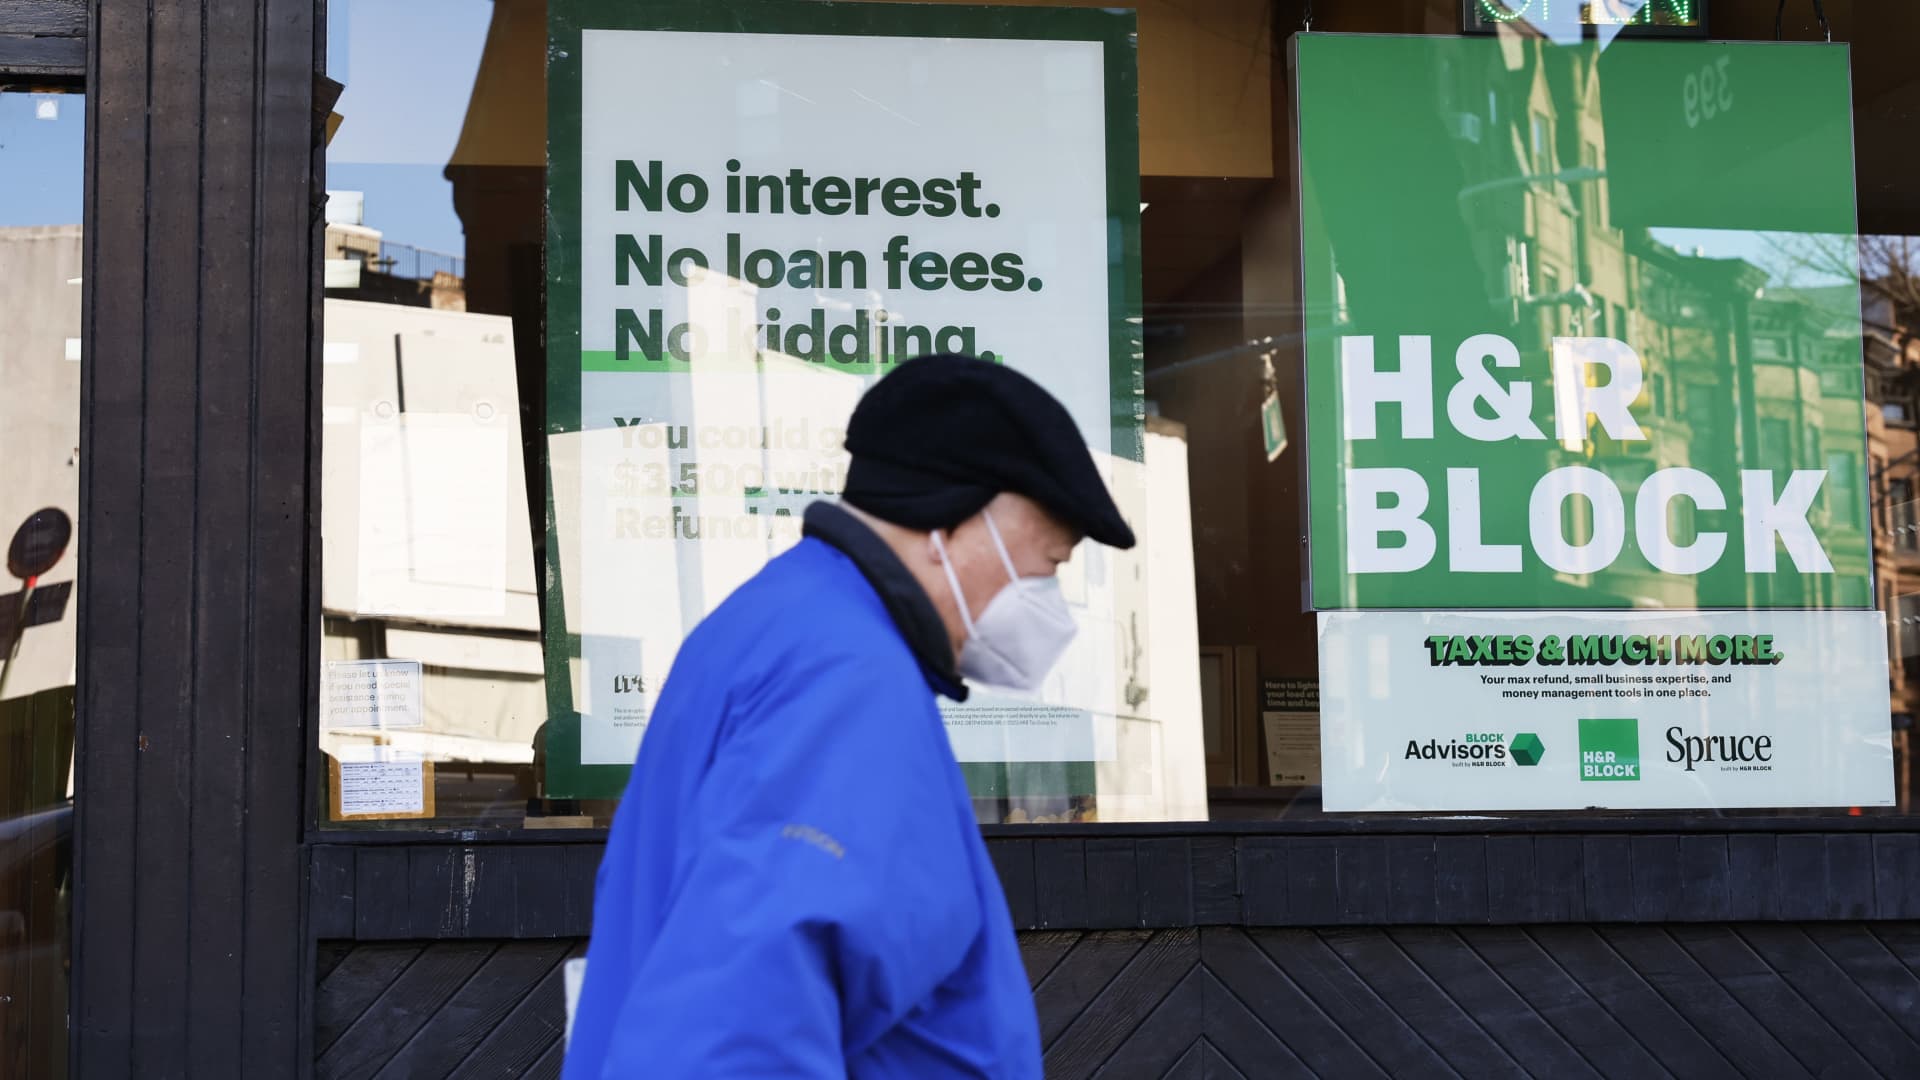 H&R Block used deceptive marketing and unfairly deleted tax filer data, FTC complaint alleges 